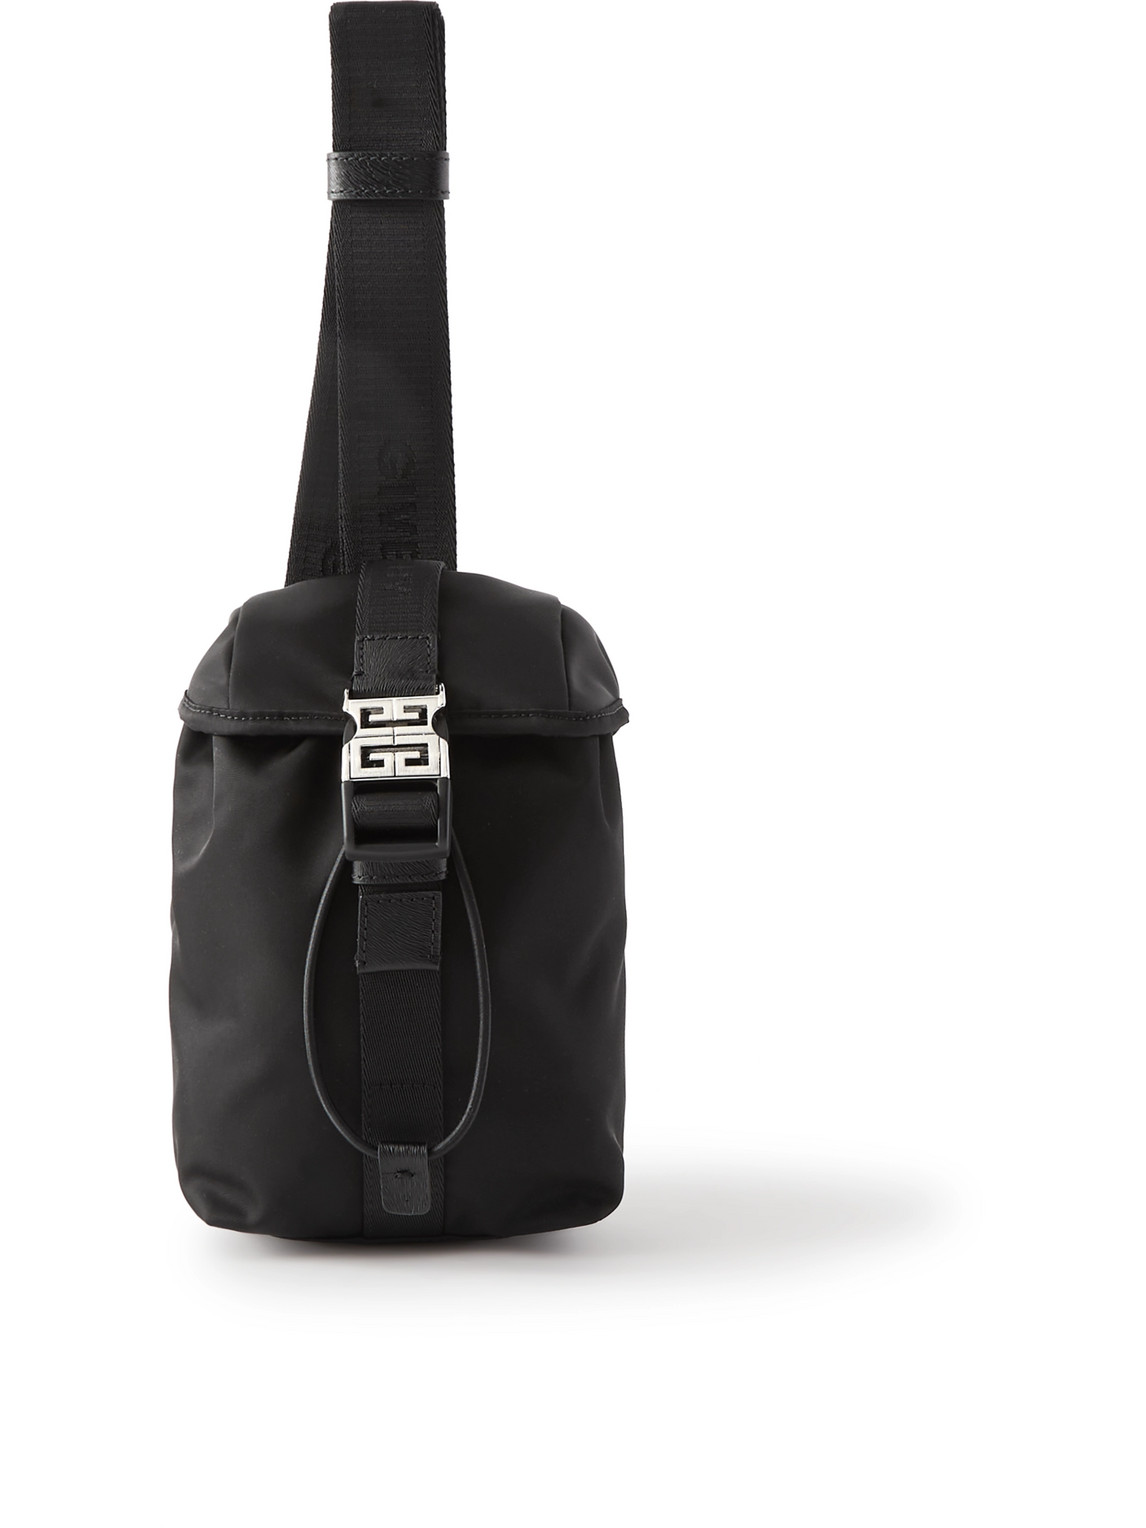 4G Mesh- and Leather-Trimmed Nylon Backpack